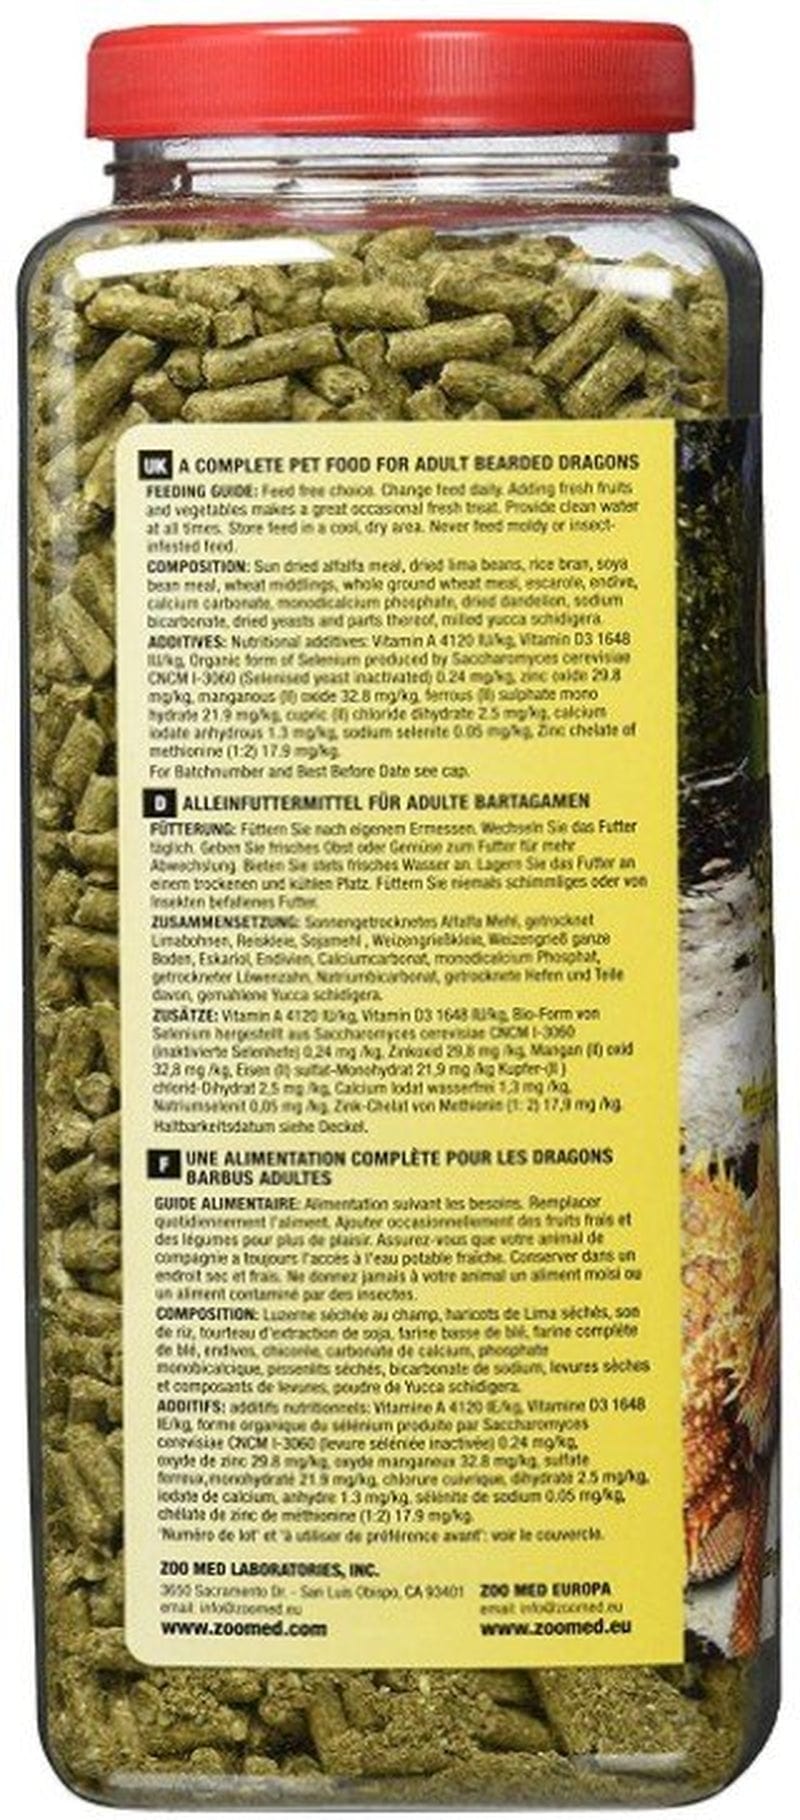 20 Oz Zoo Med Natural Adult Bearded Dragon Food